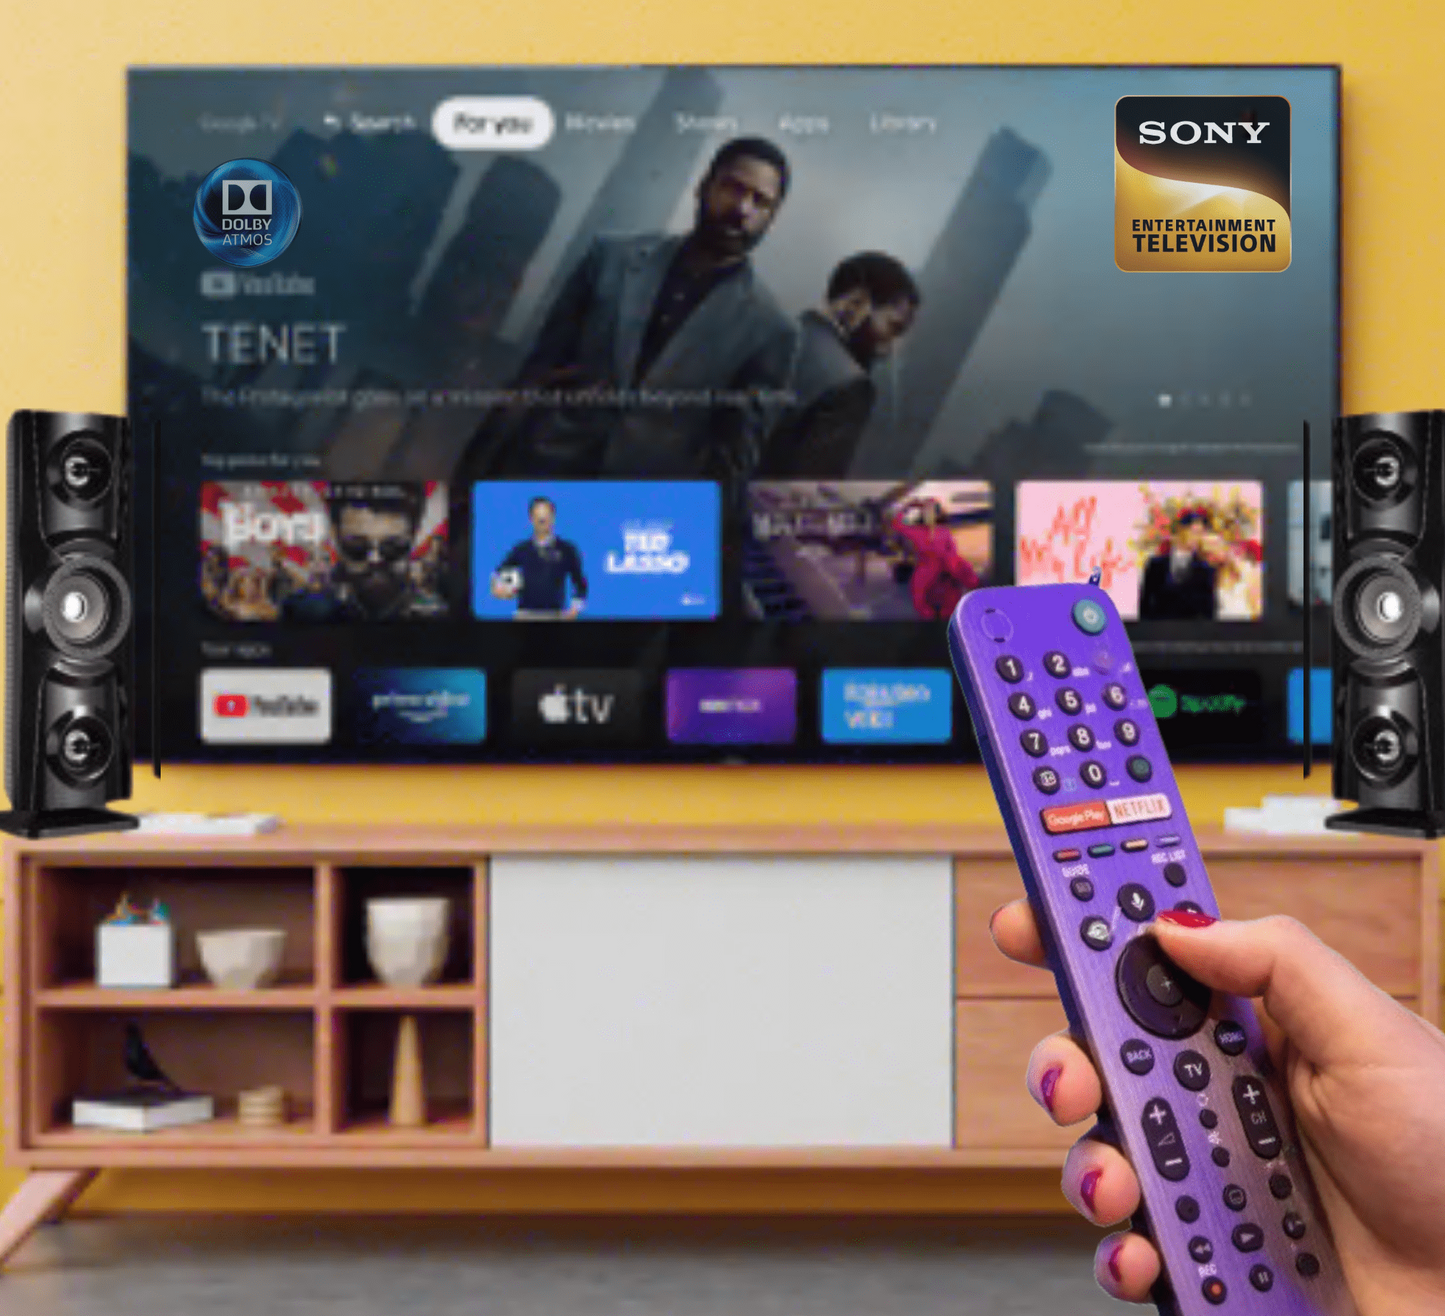 Orginal Sony Smart TV remote control with Googleplay  and Netflix and google voice